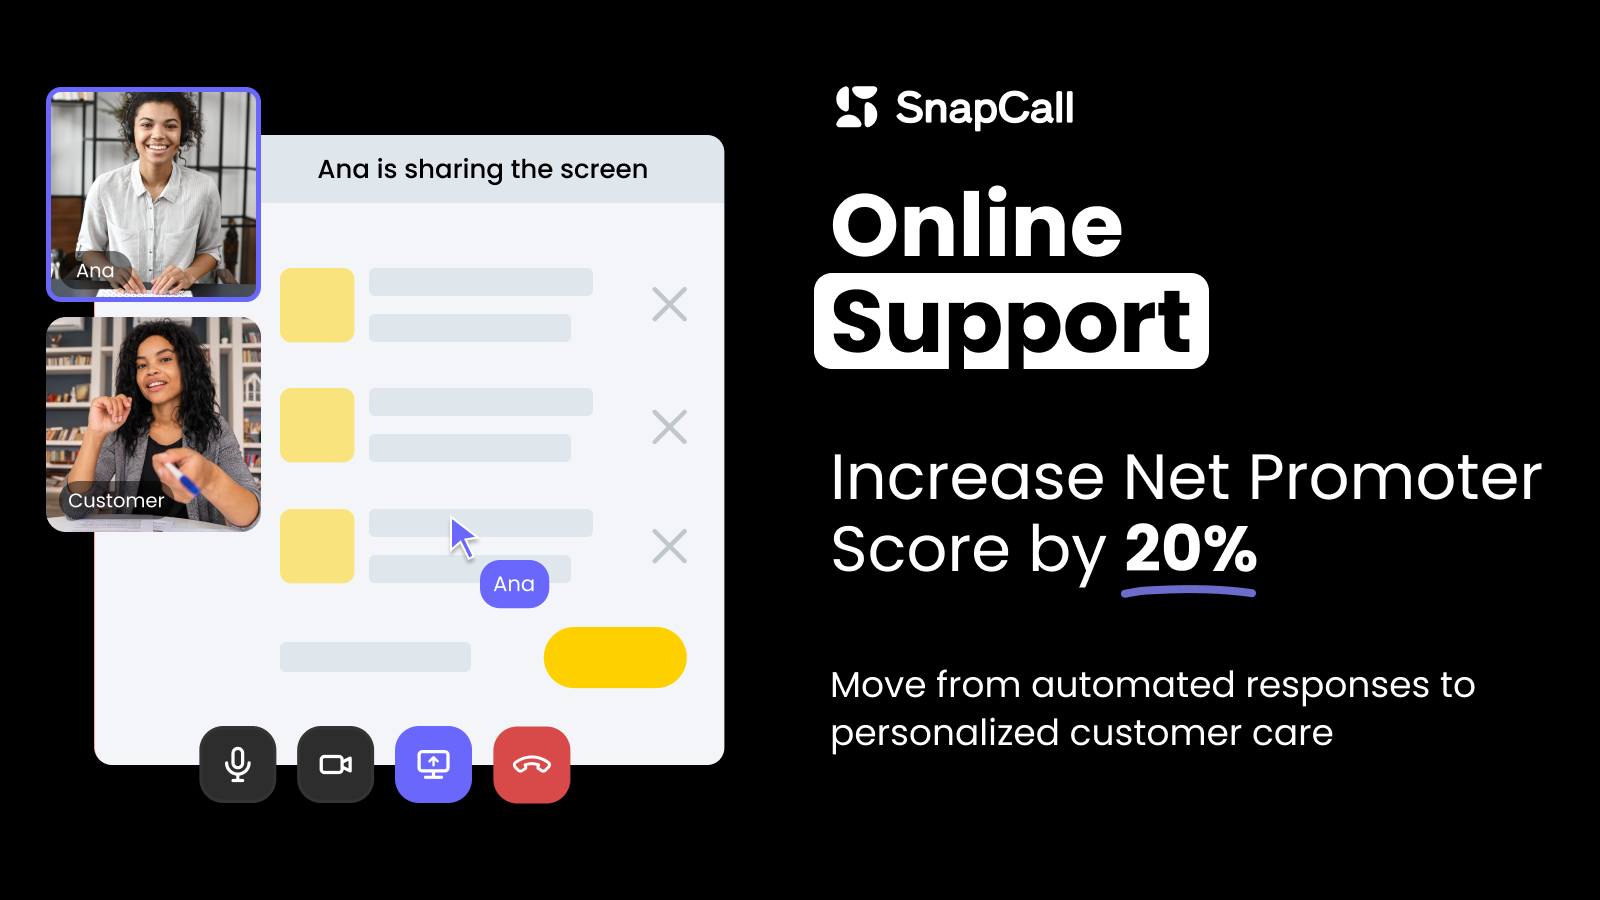 Online Support: increase Net Promoter Score by 20%